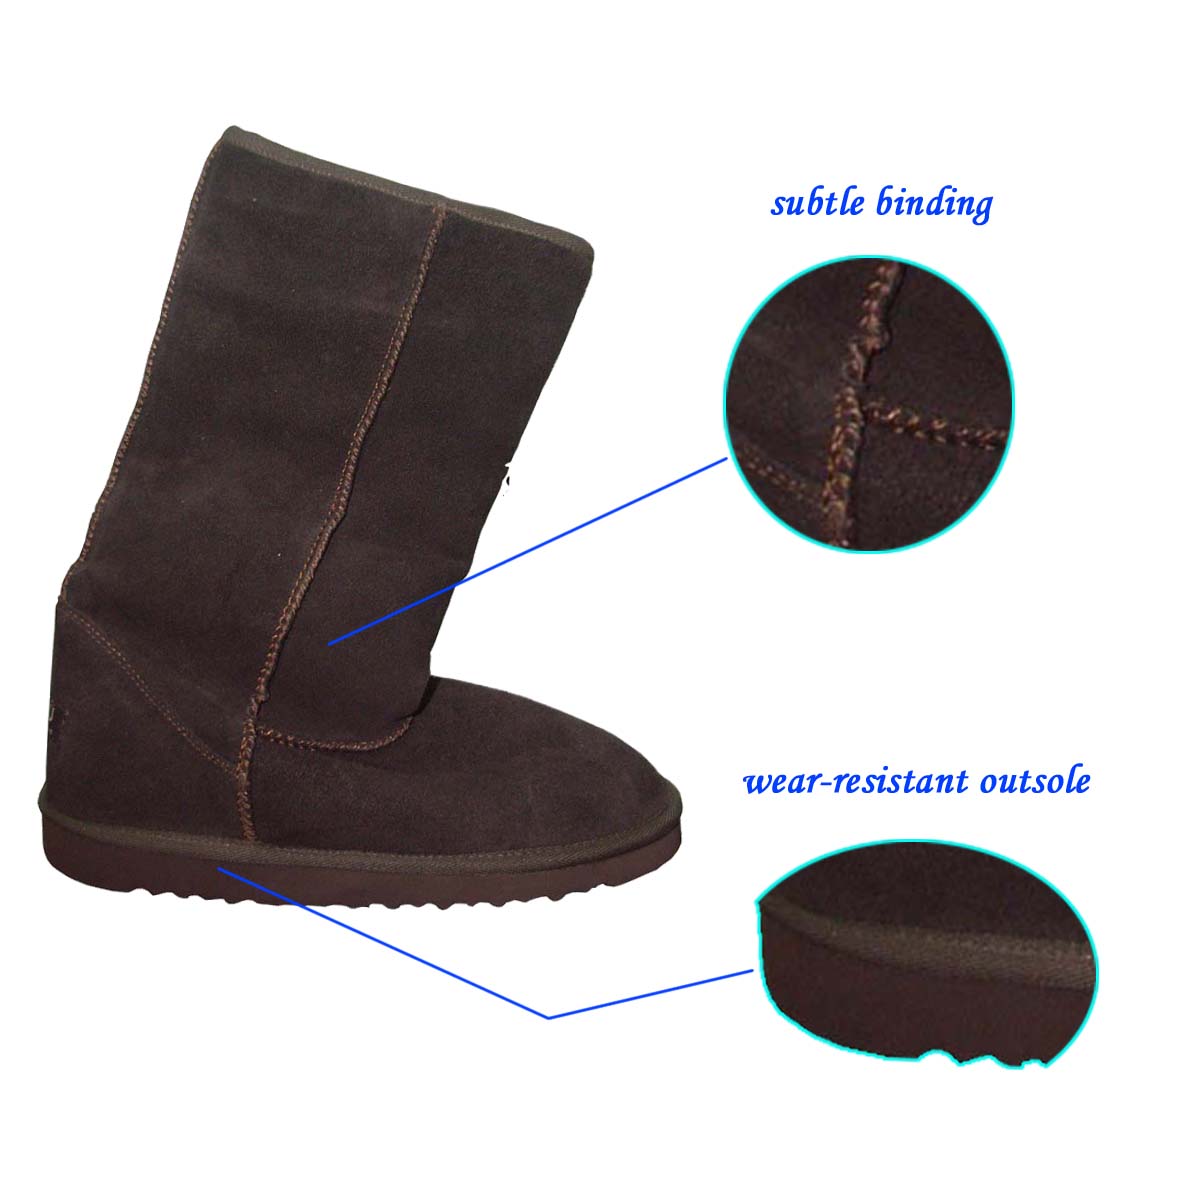 Latest Designed Classic Warm Camel woman Snow Boots with Flexible EVA Outsole from Chinese Market